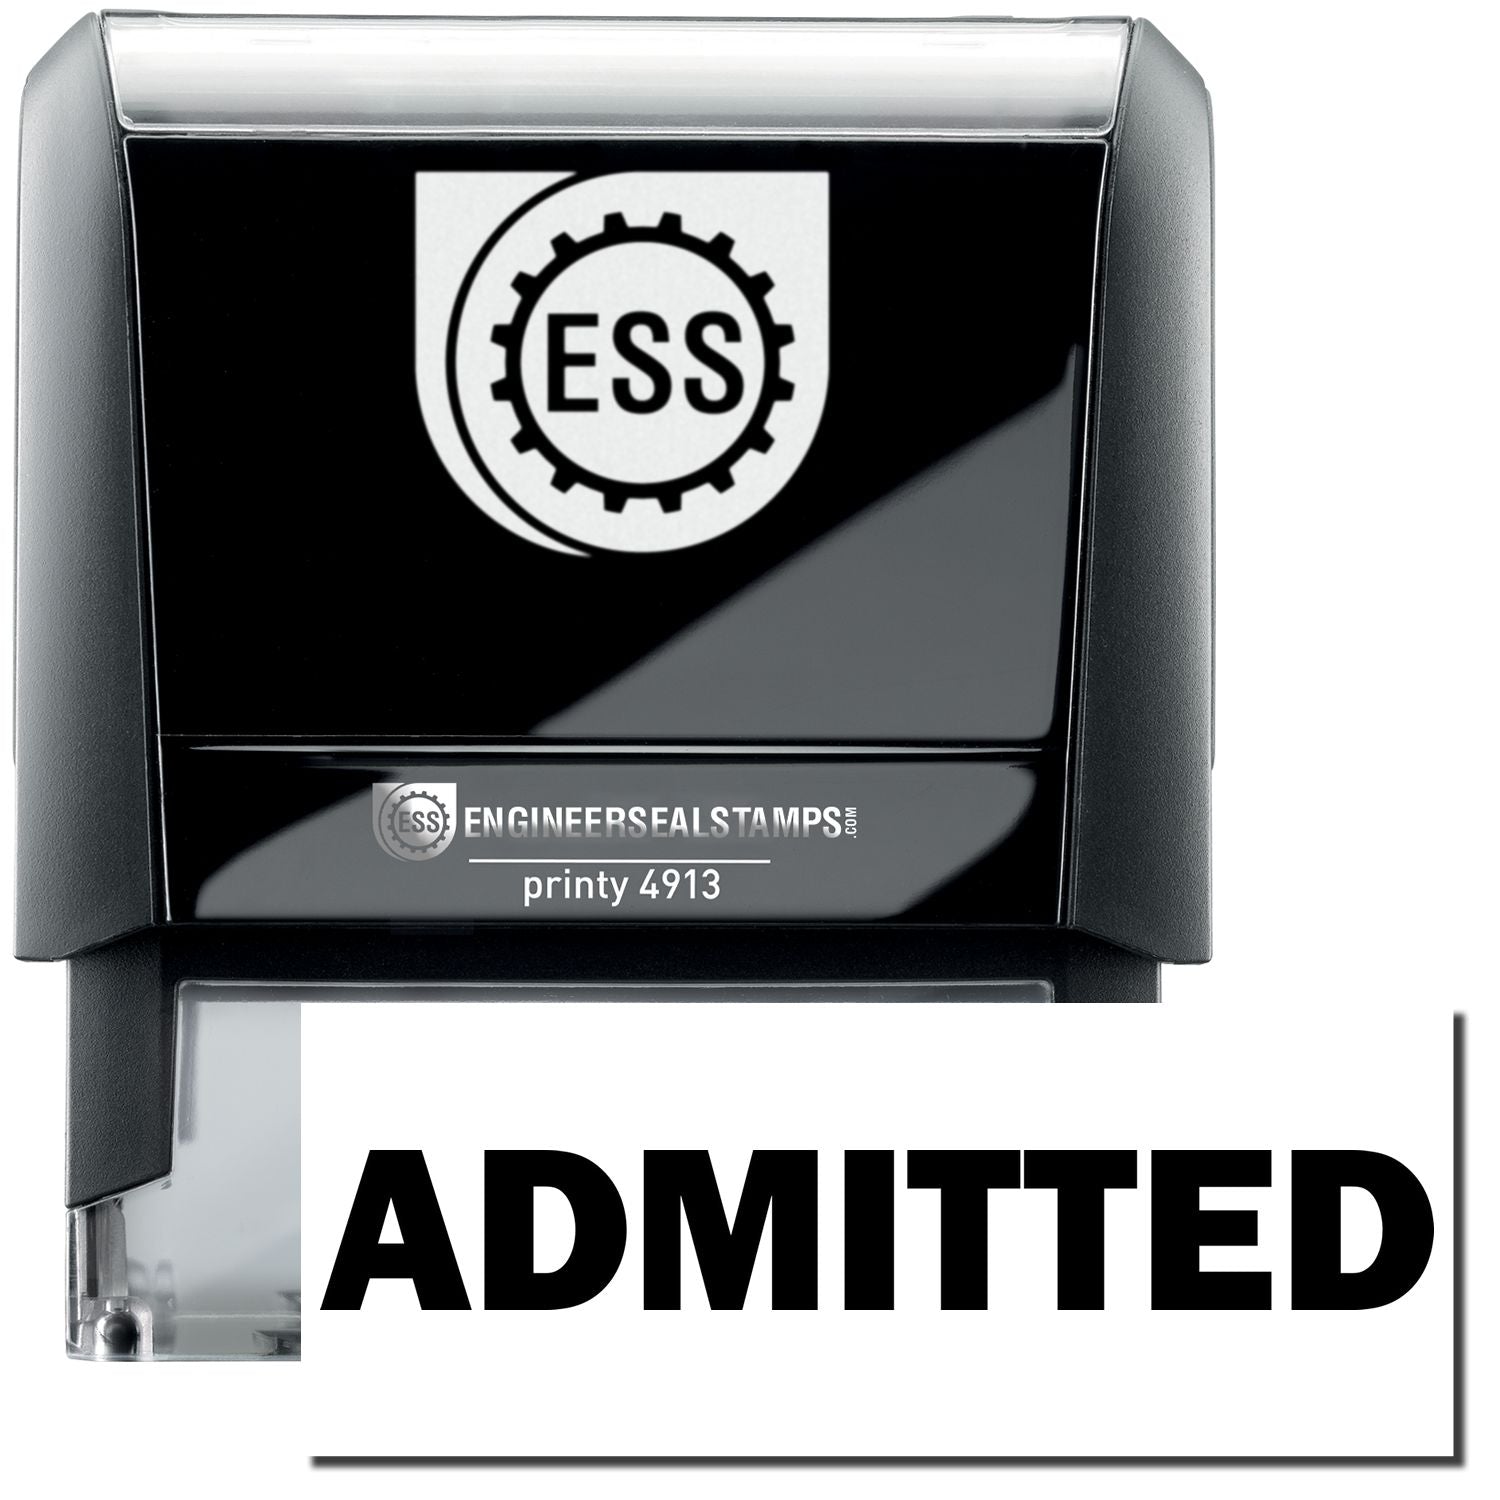 A self-inking stamp with a stamped image showing how the text "ADMITTED" in a large font is displayed by it after stamping.